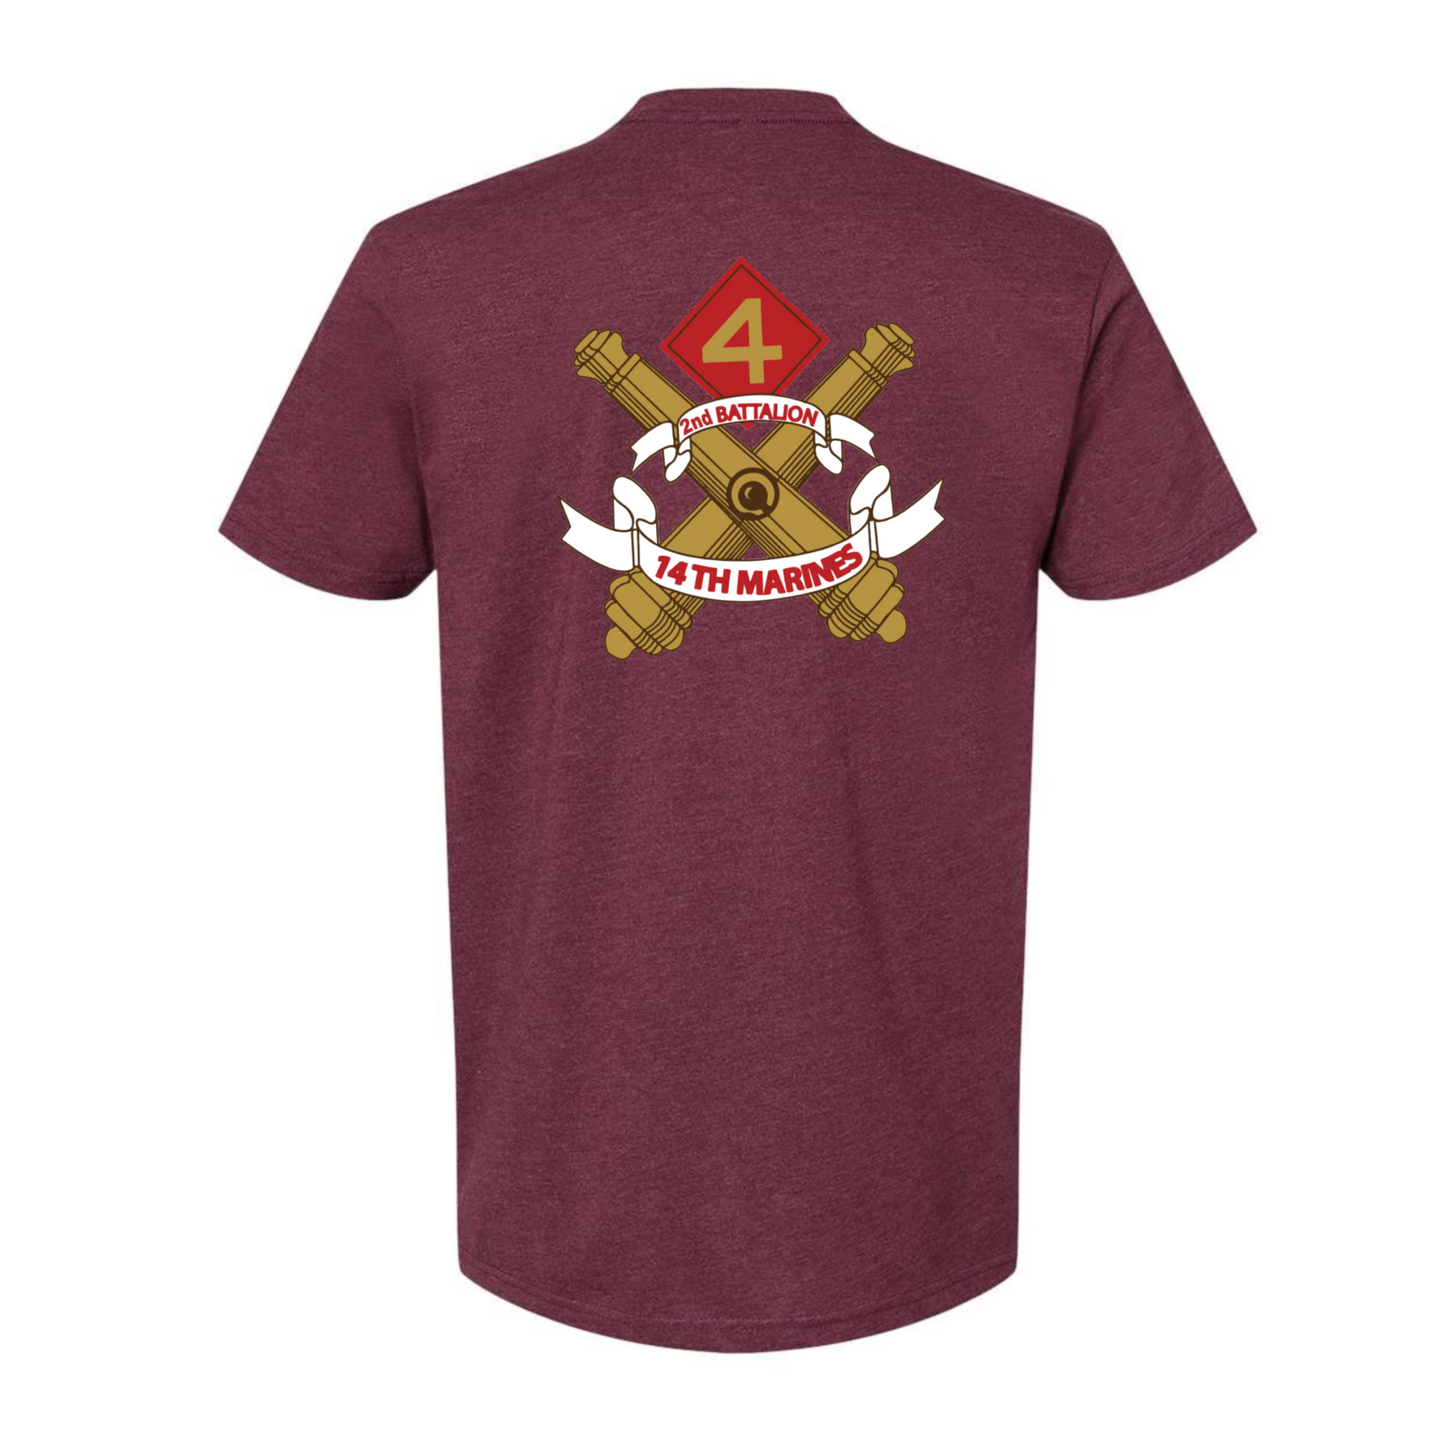 2nd Battalion 14th Marines Peacemaker